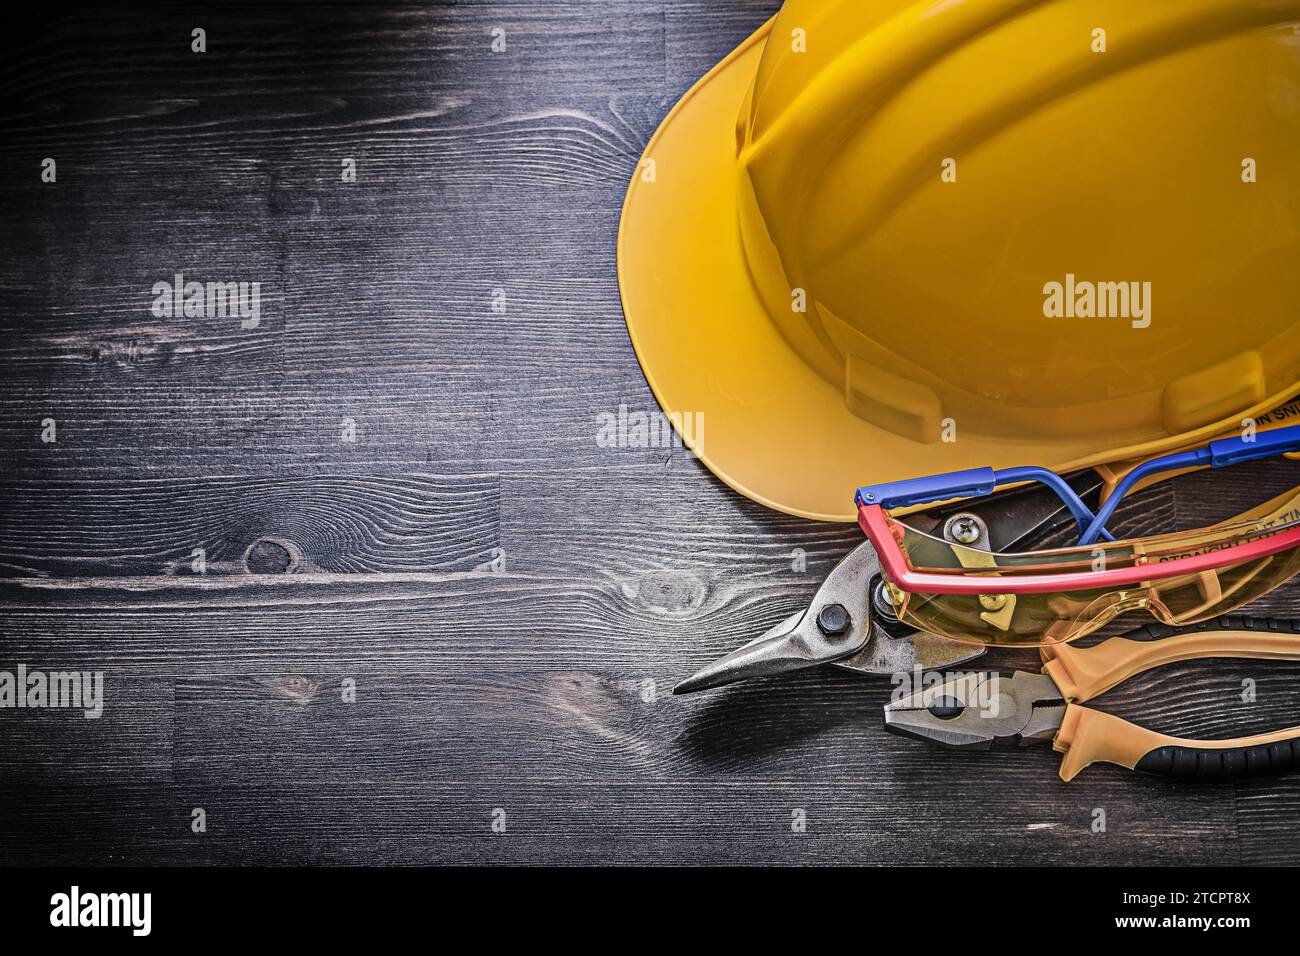 Construction helmet Safety goggles Pliers Tin snips on a wooden background Stock Photo